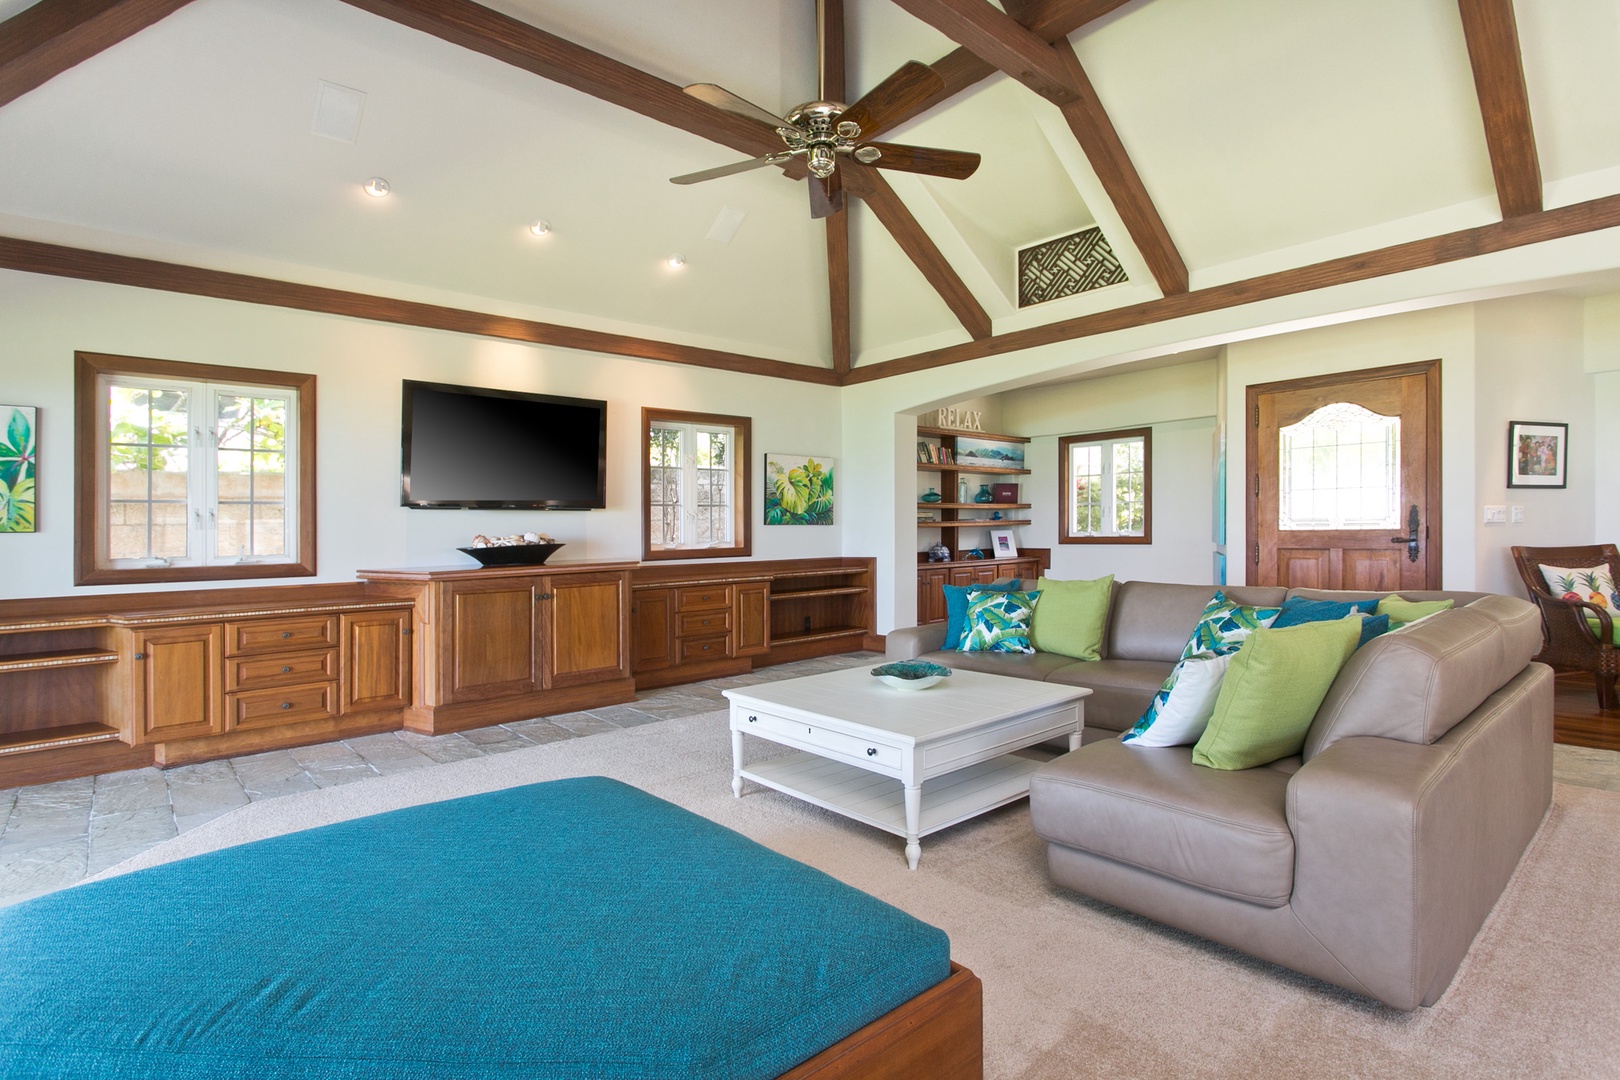 Kailua Vacation Rentals, Hale Melia* - Unwind in the heart of the home, a cozy and chic living area.